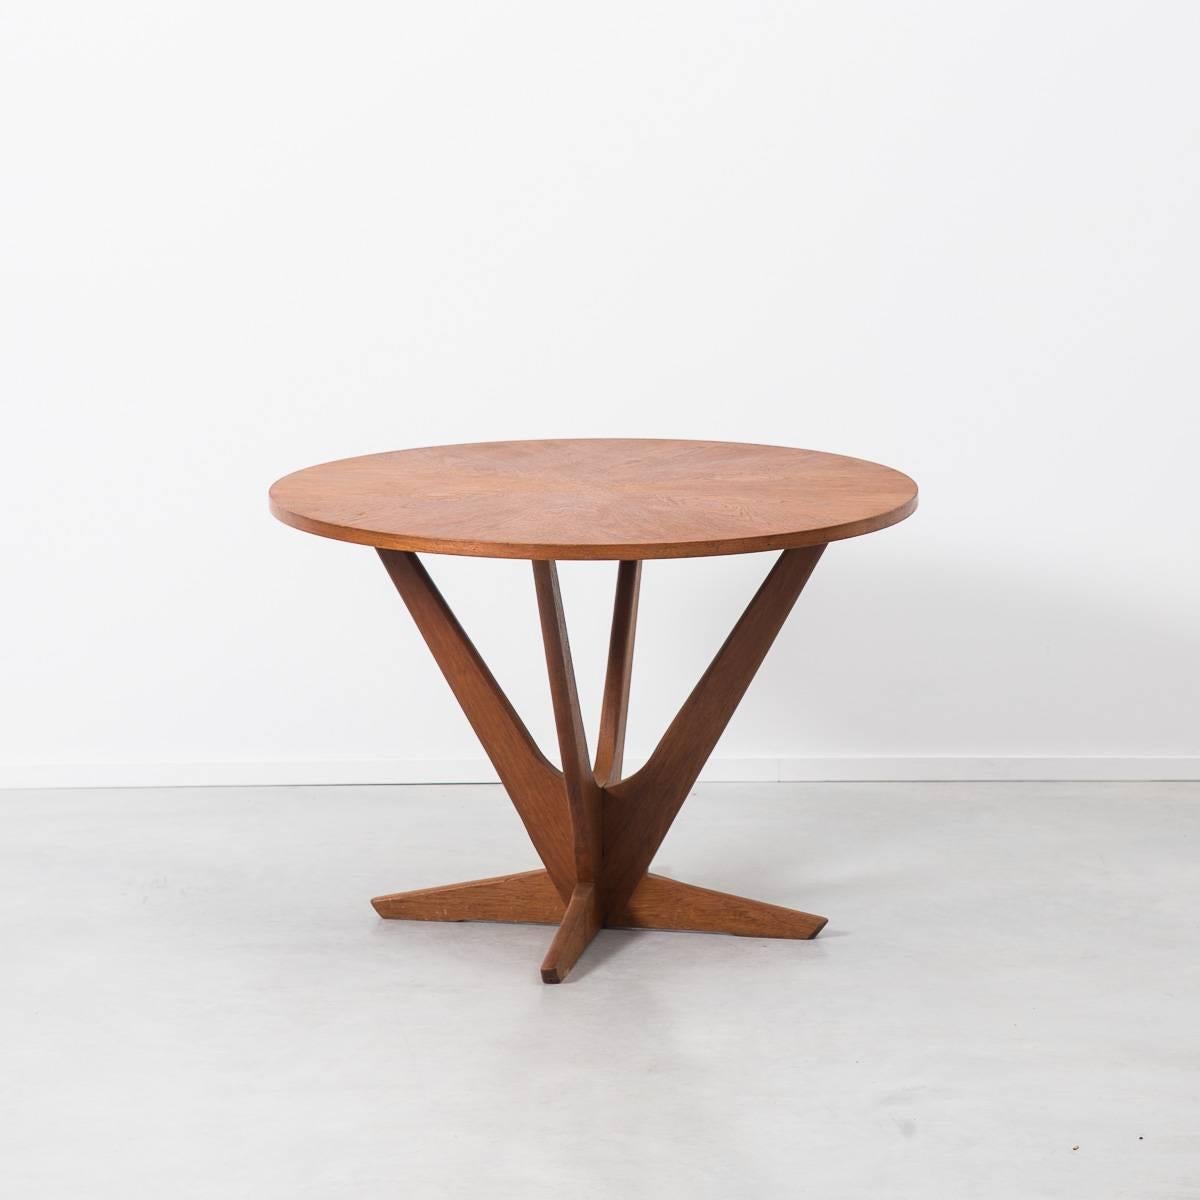 A round teak Danish coffee table designed by Soren Georg Jensen - son of jewellery designer Georg Jensen. Made for Kubus of Denmark in the 1960s, it is organic and naturalistic in form. A graphic teak, radial veneered top sits on a solid base. A